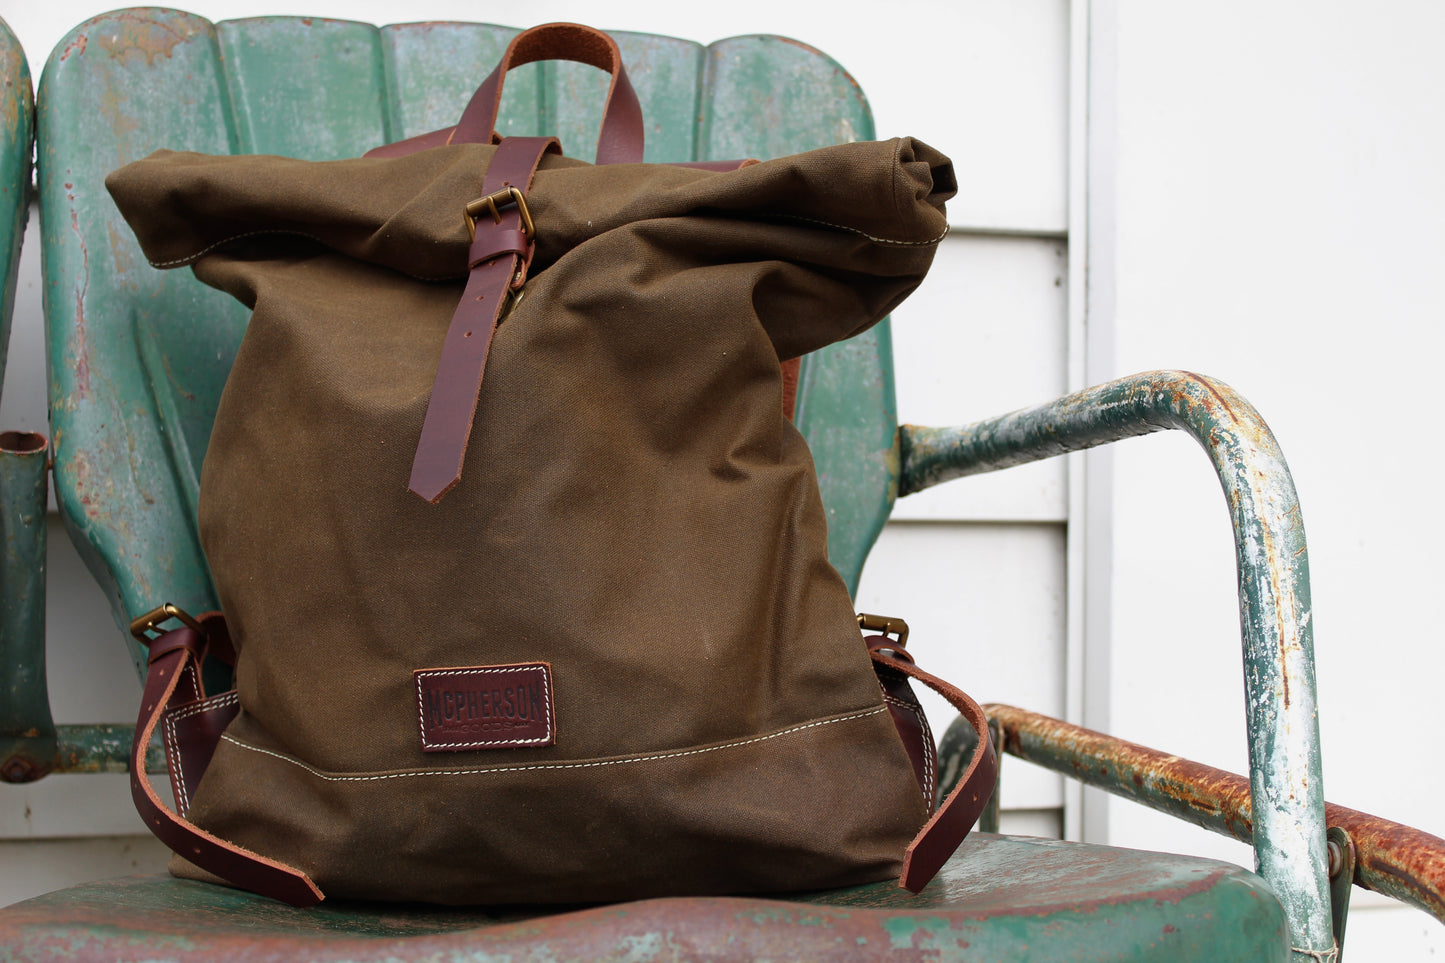 McPherson Goods "Roll Top Backpack"